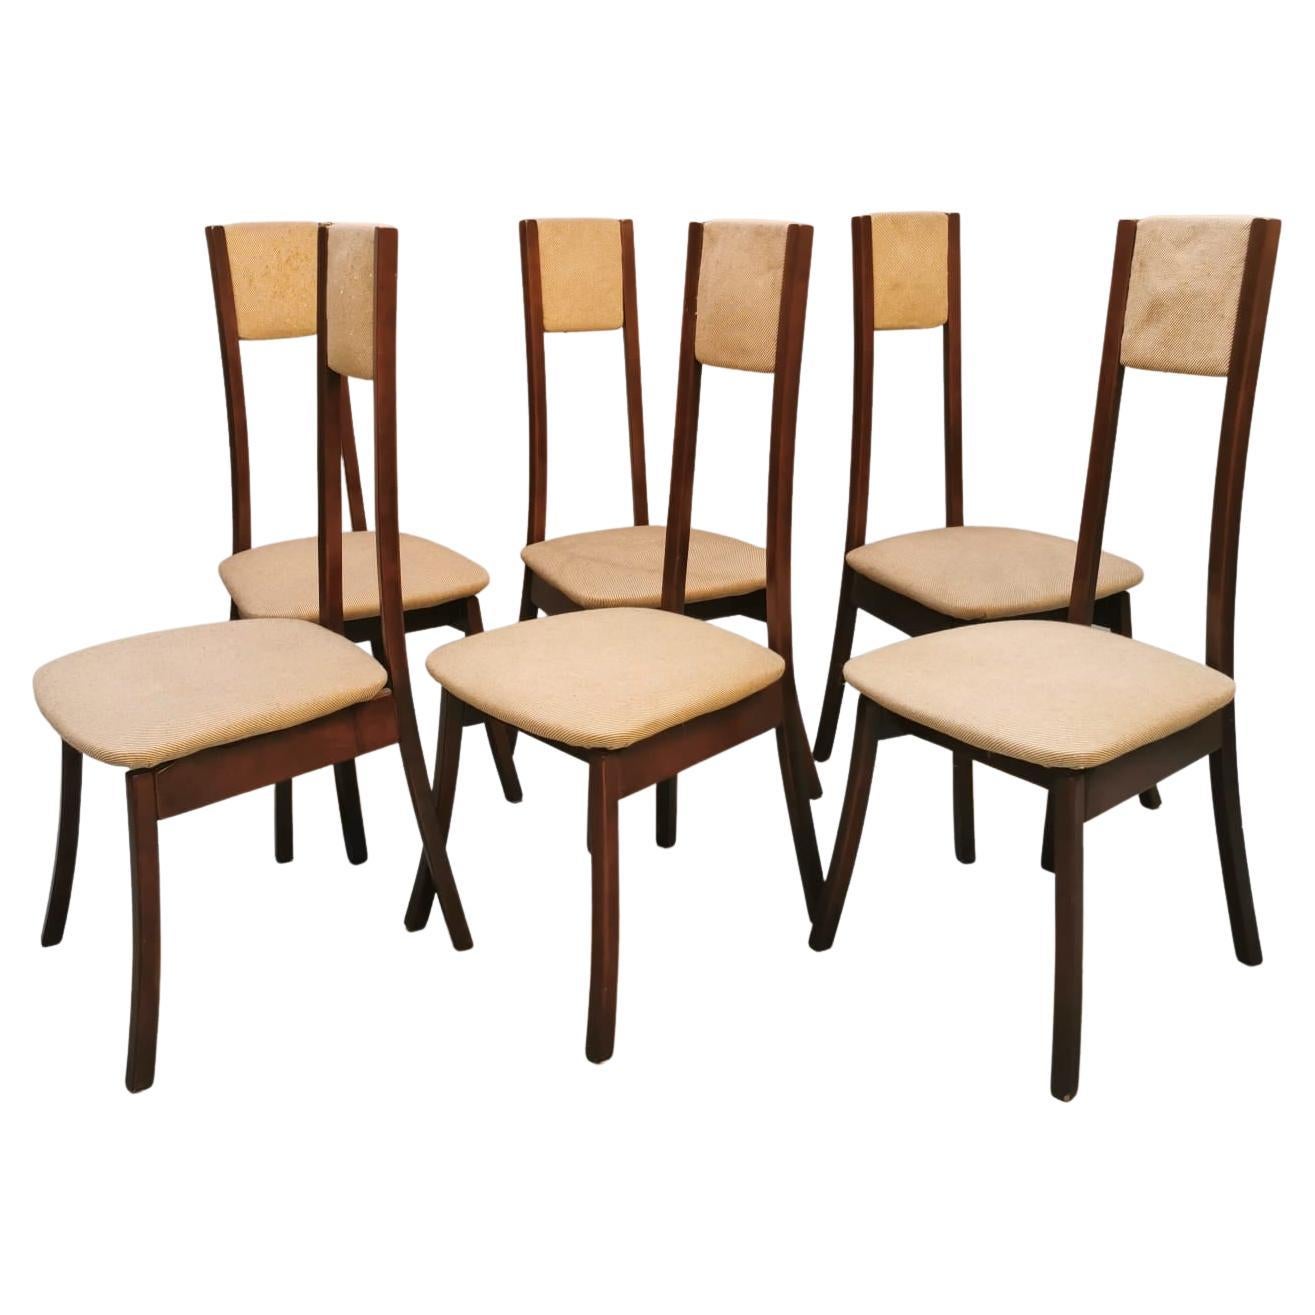 Set of six Chairs Programm S11, Angelo Mangiarotti for Sorgente Del Mobile